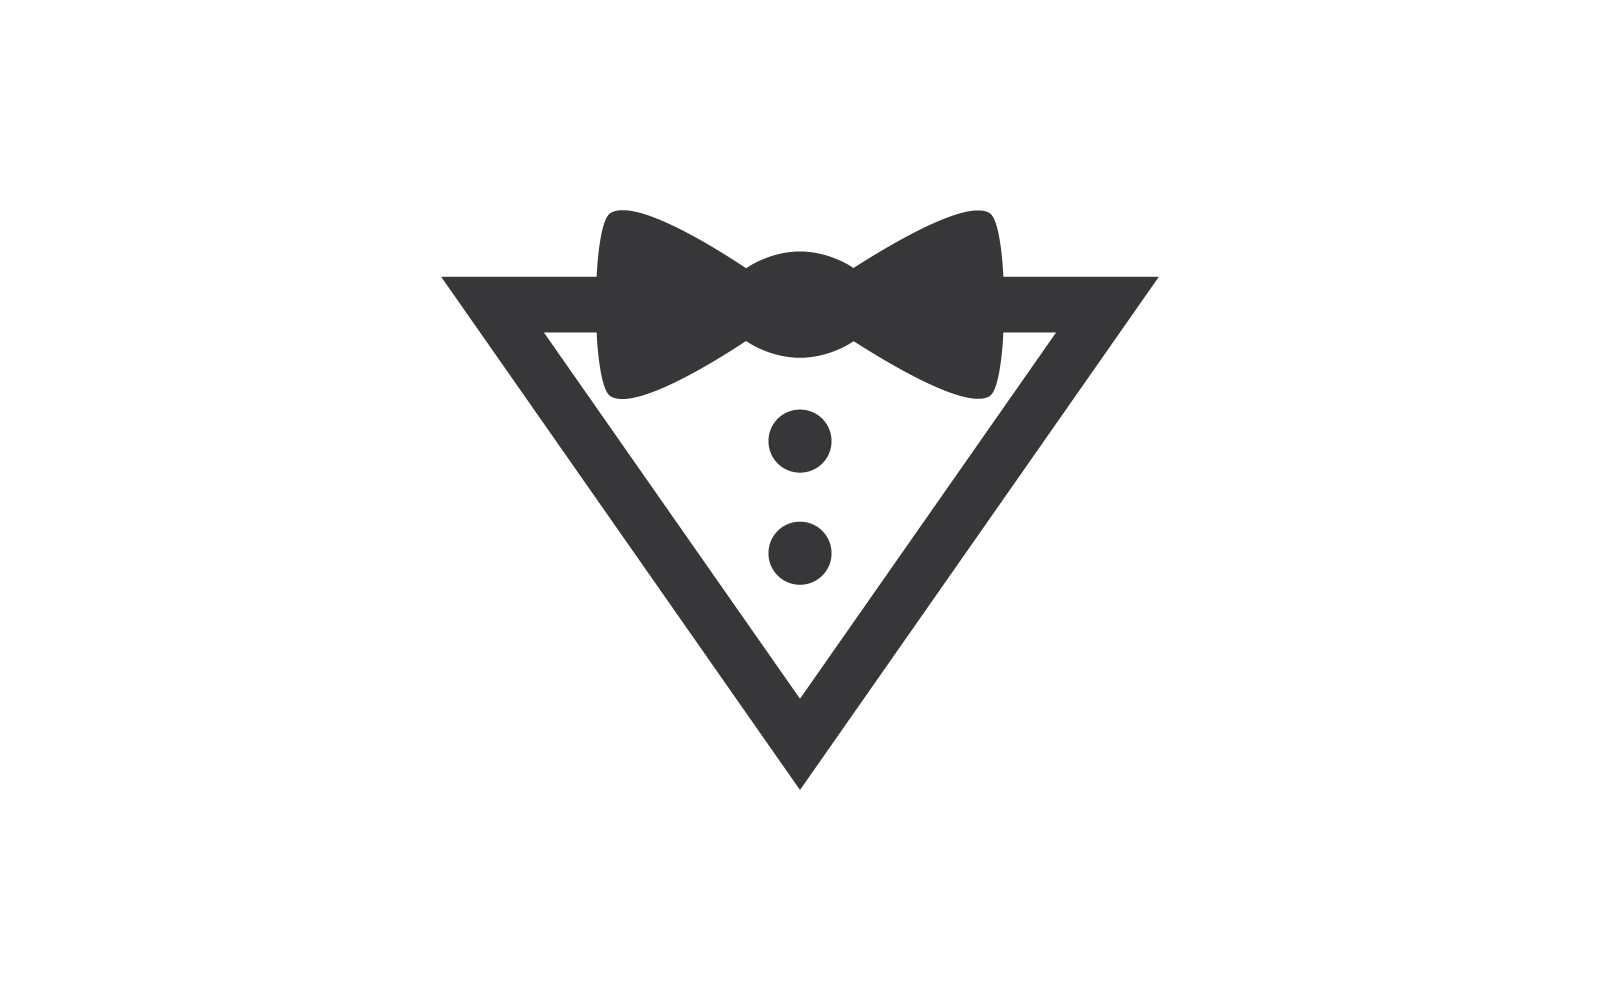 Bow tie icon vector flat design template